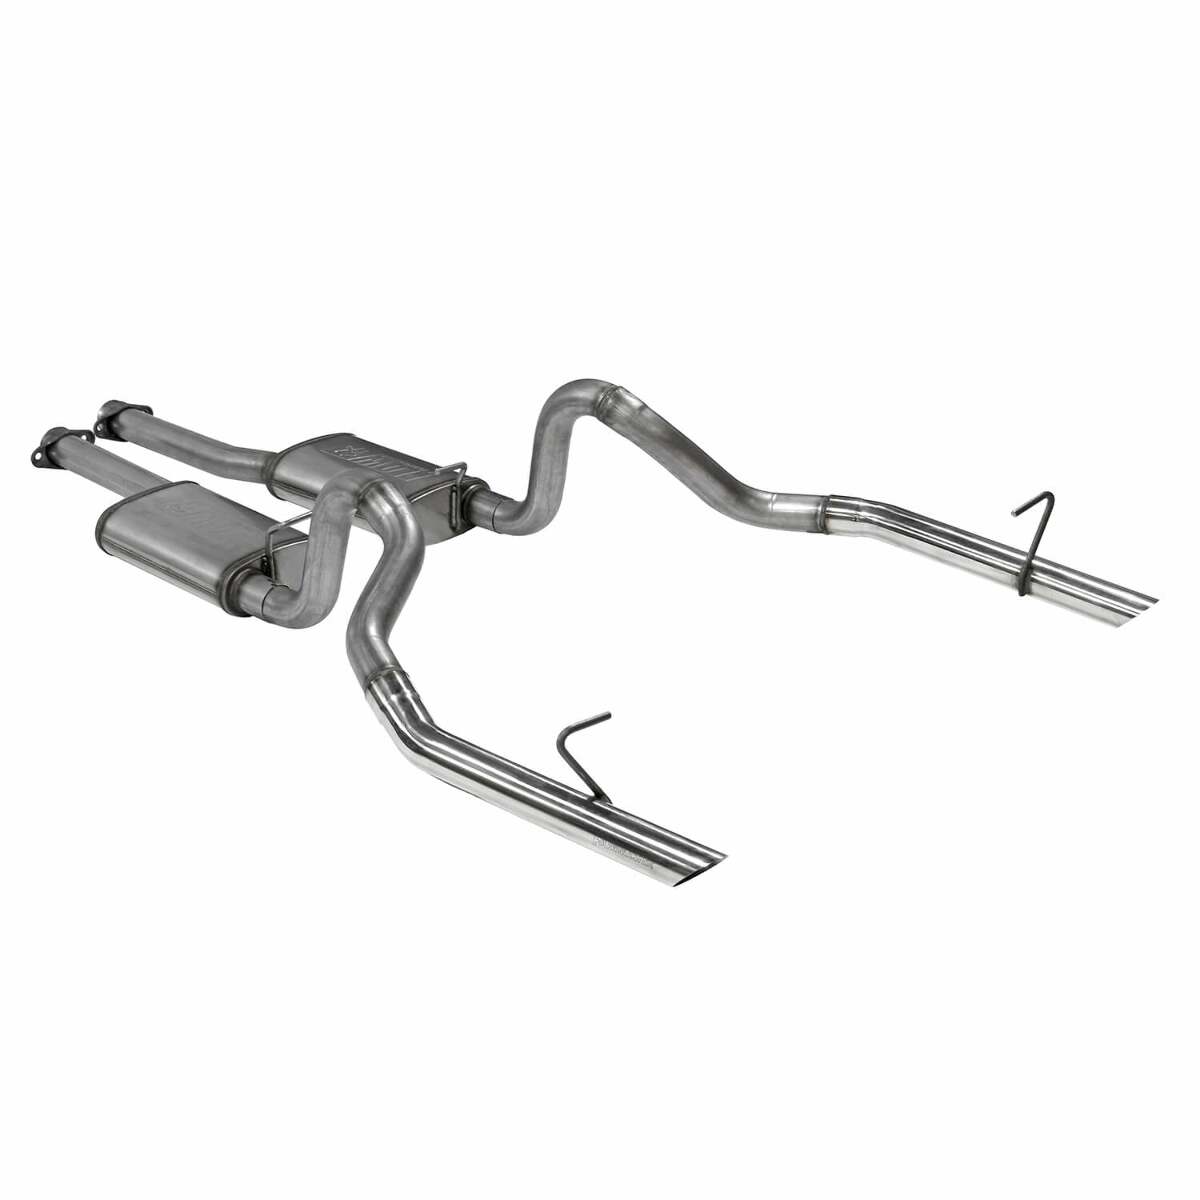 Fits Ford Mustang LX 1986-1993 Exhaust Pipe System 2.0 5.0L Flowmaster 717213